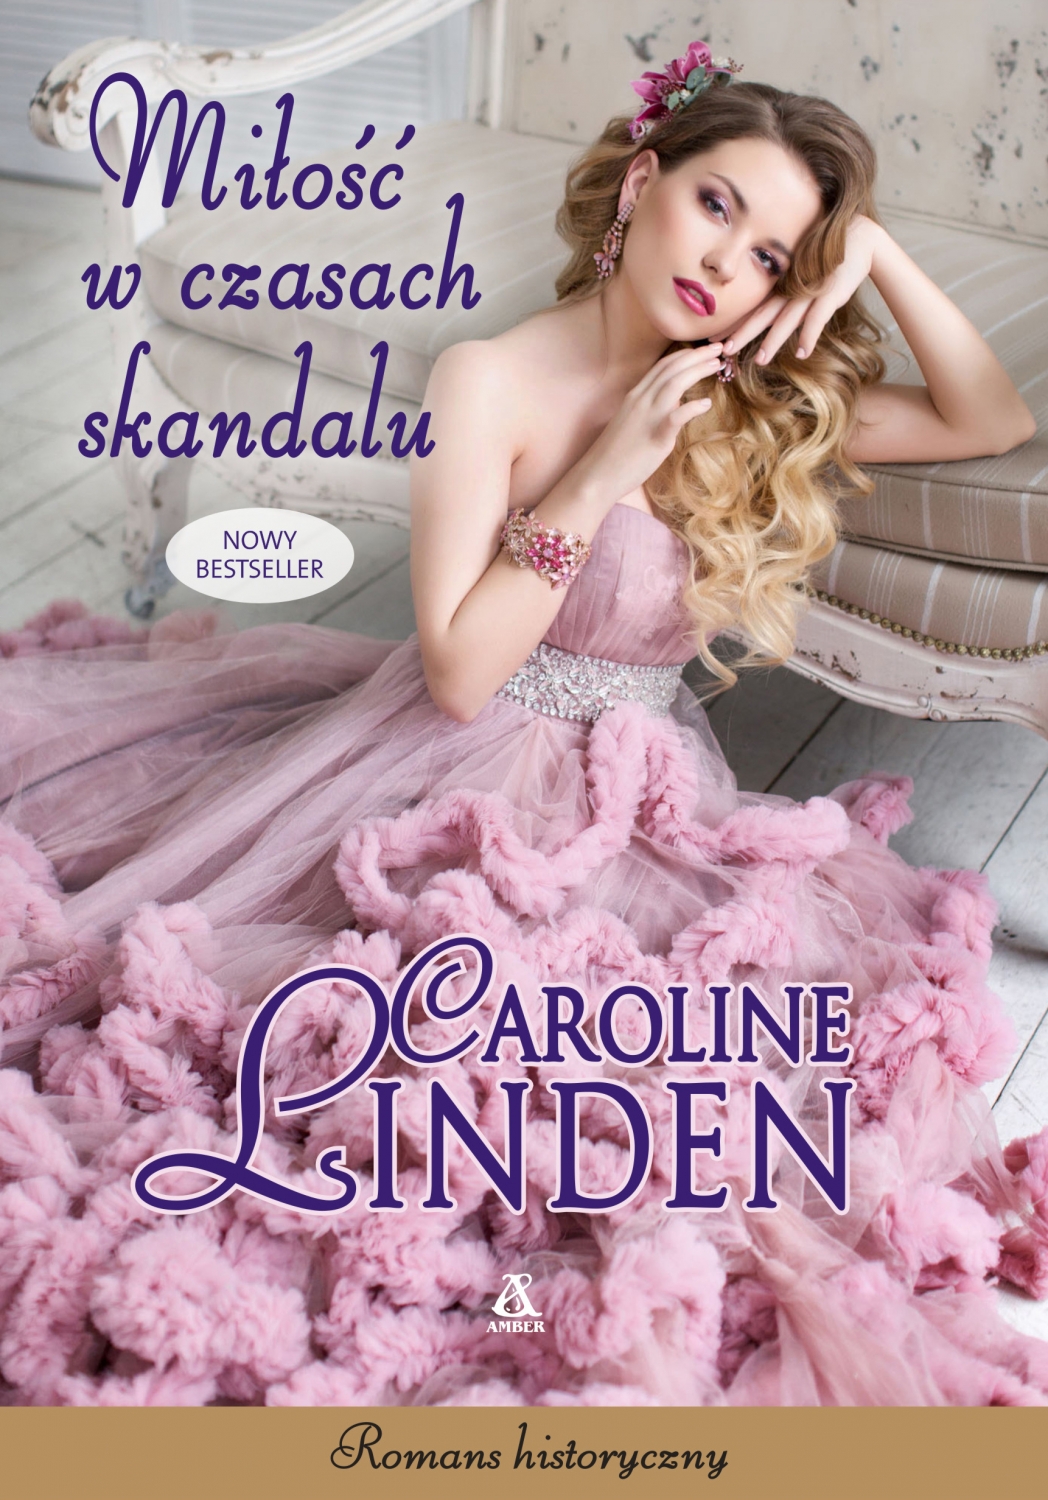 love and other scandals by caroline linden